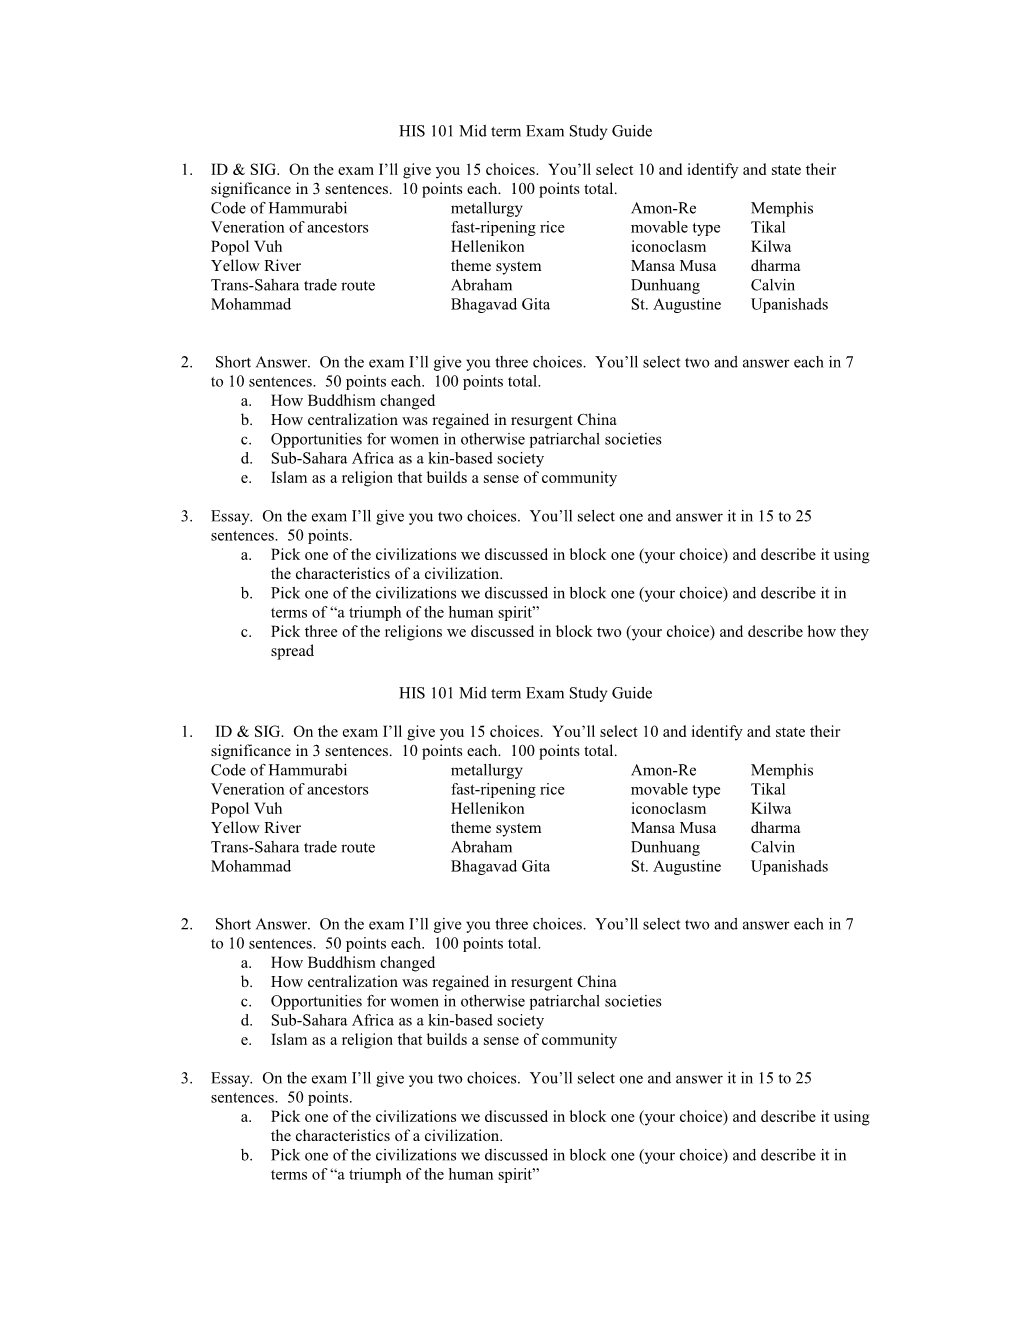 HIS 101 Mid Term Exam Study Guide